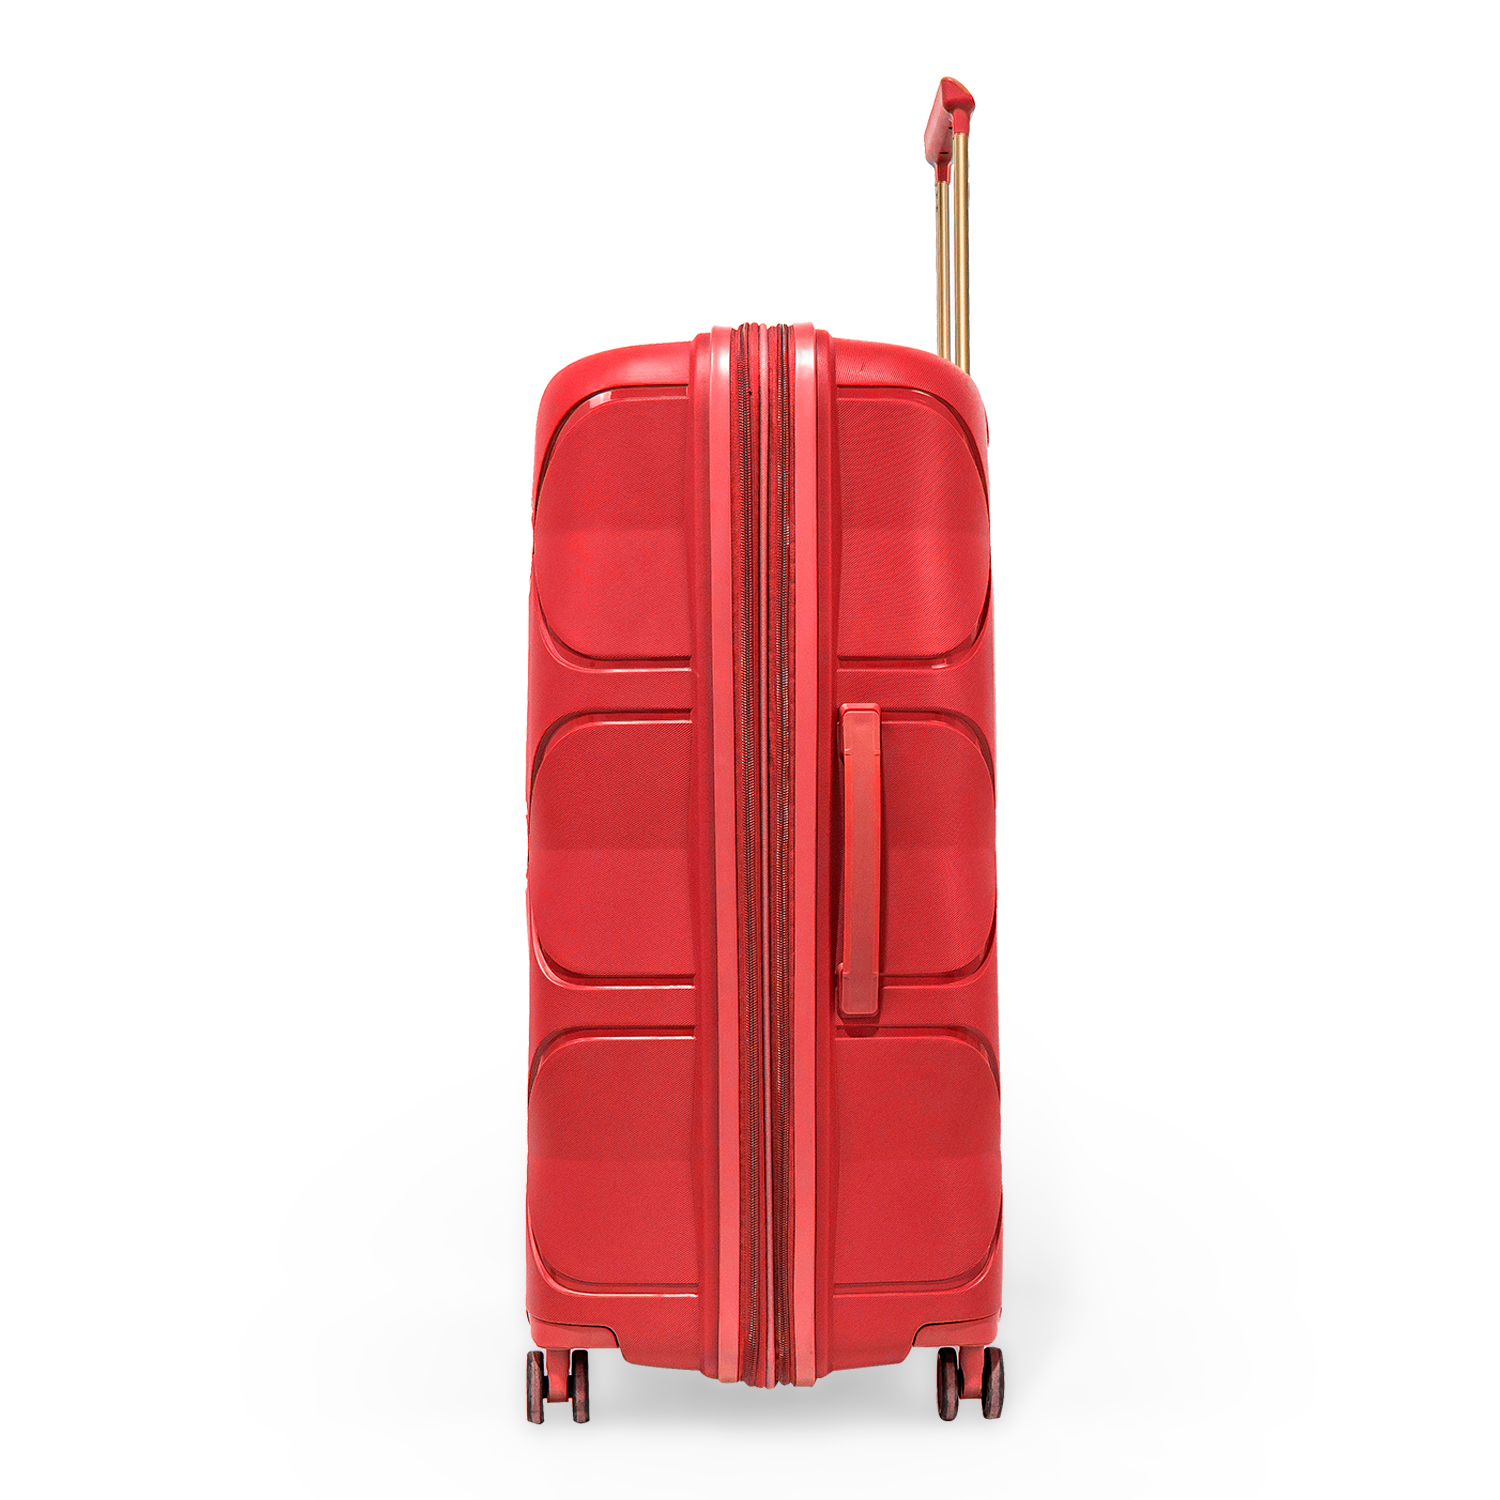 Pierre Cardin Trolley Strong Flexible Suitcases Set of 3 Red